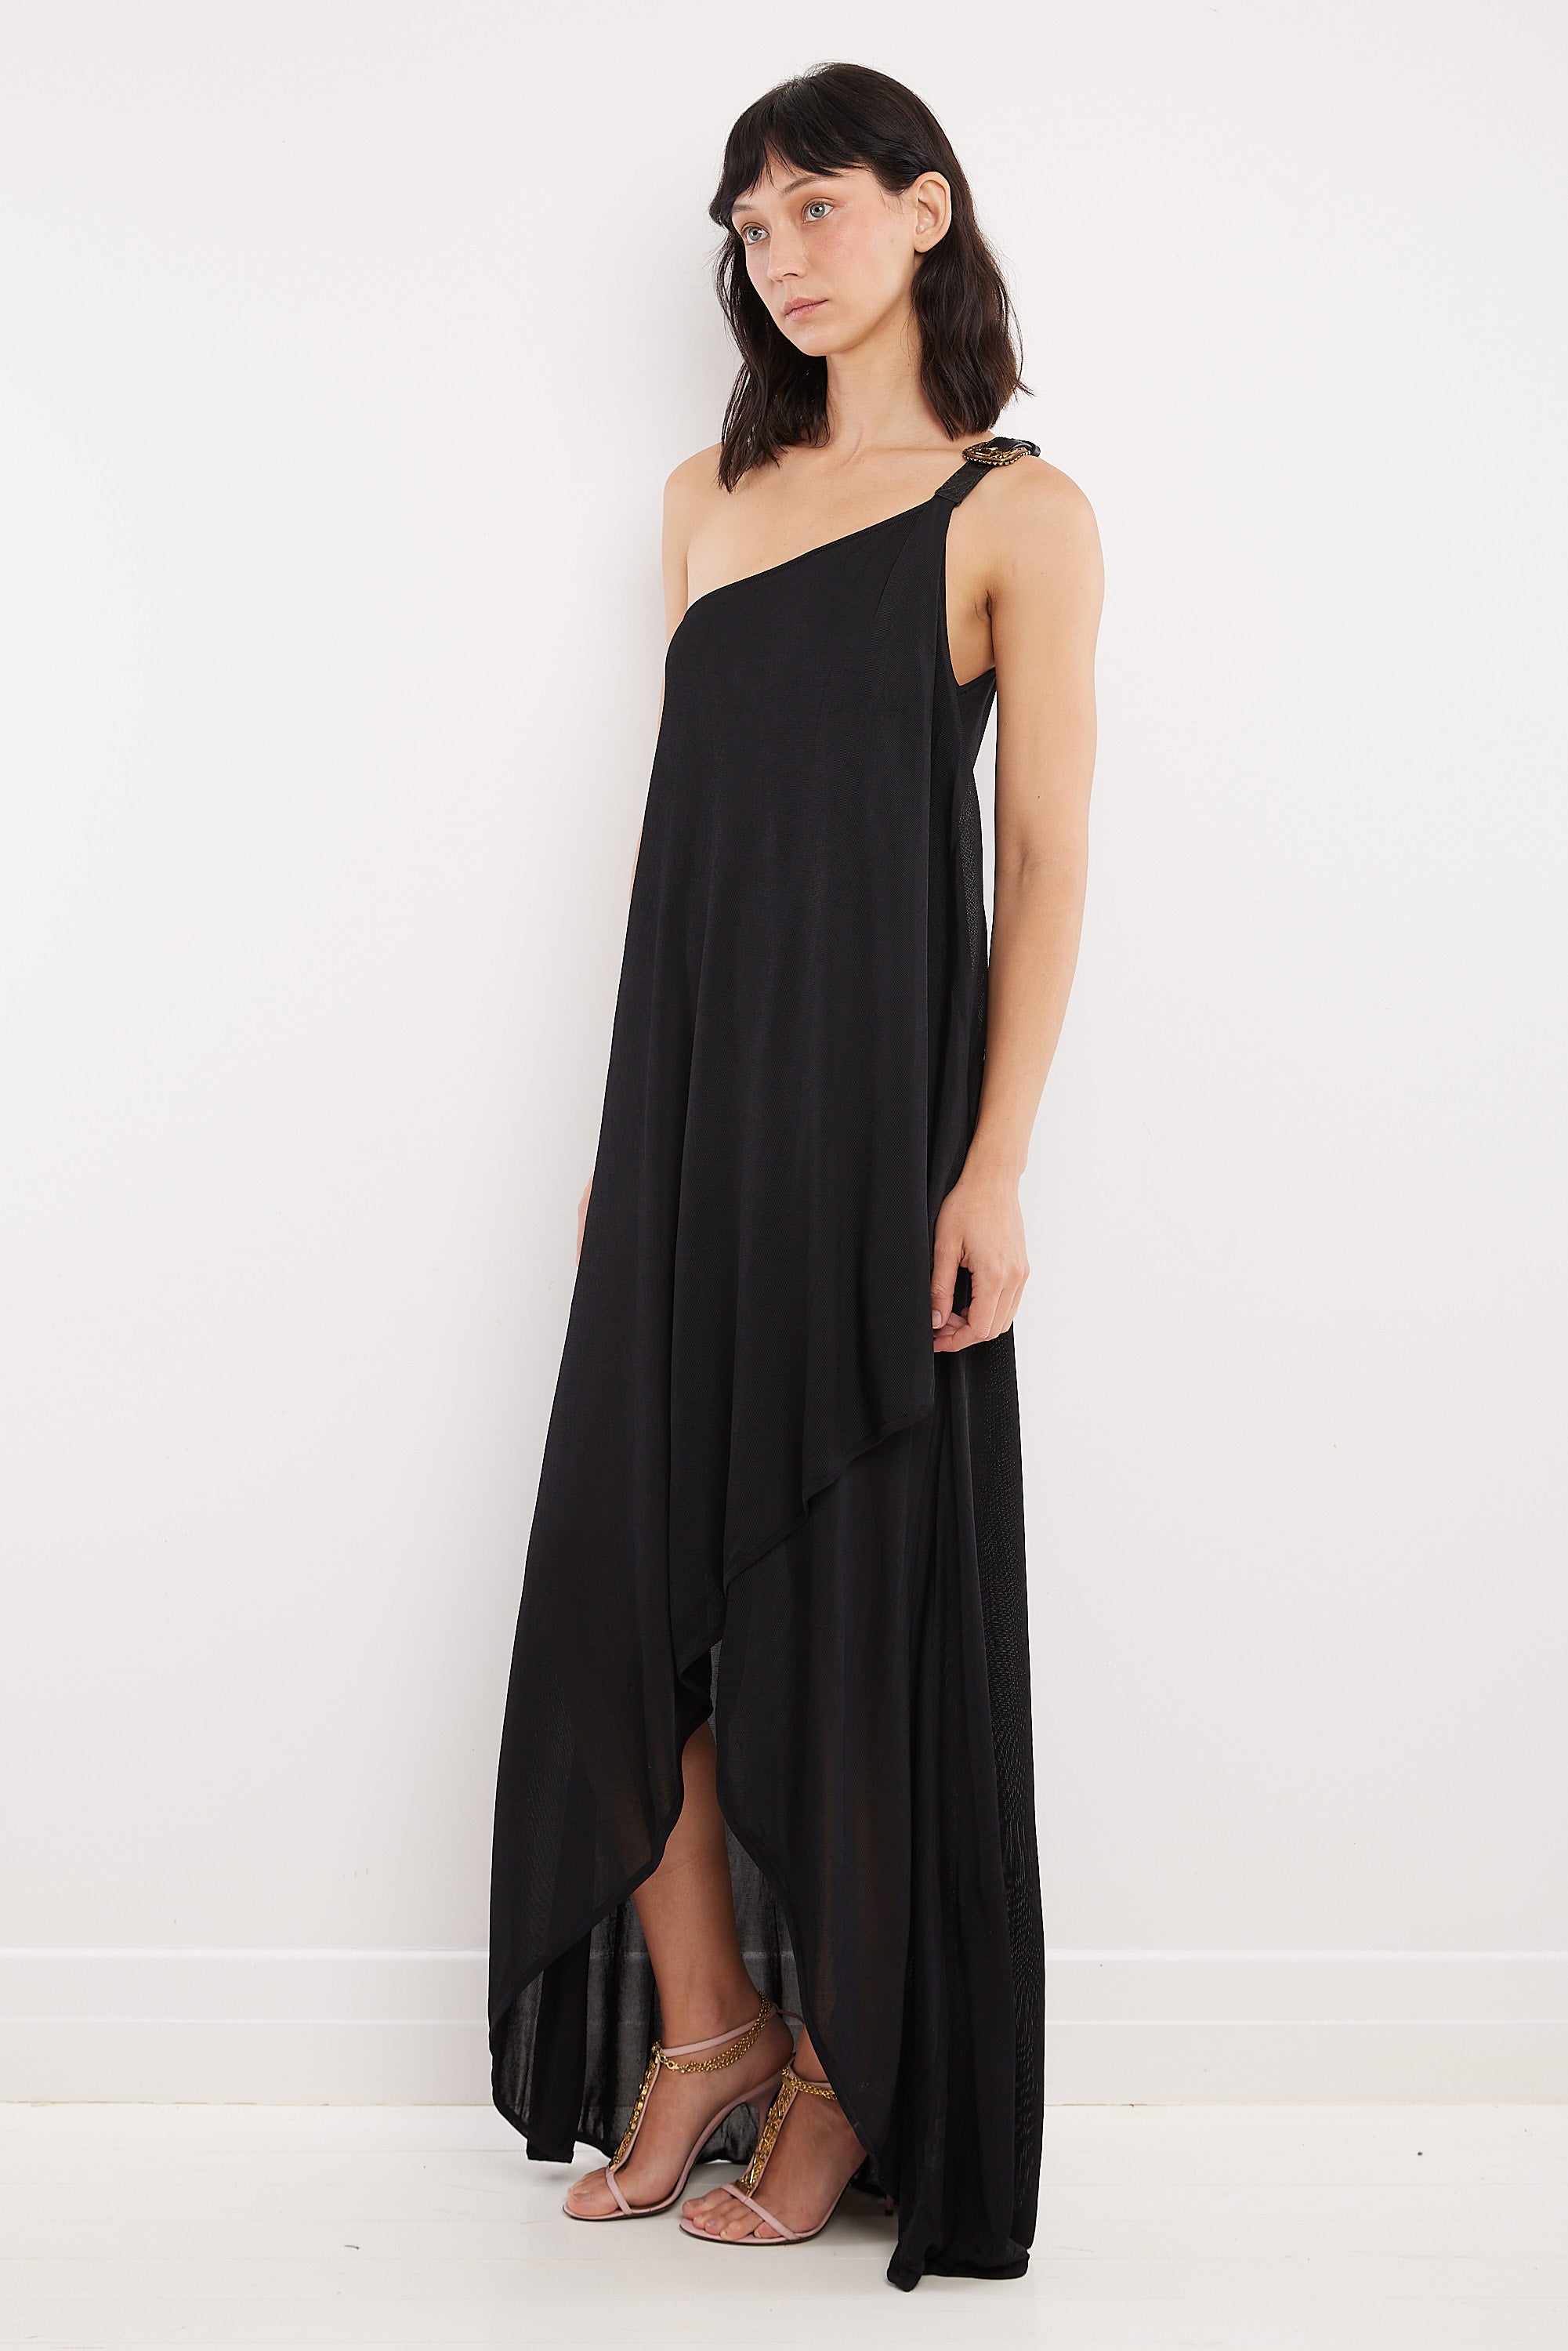 Alexander McQueen <br> Pre-Fall 2009 one shoulder knit dress with buckle detail